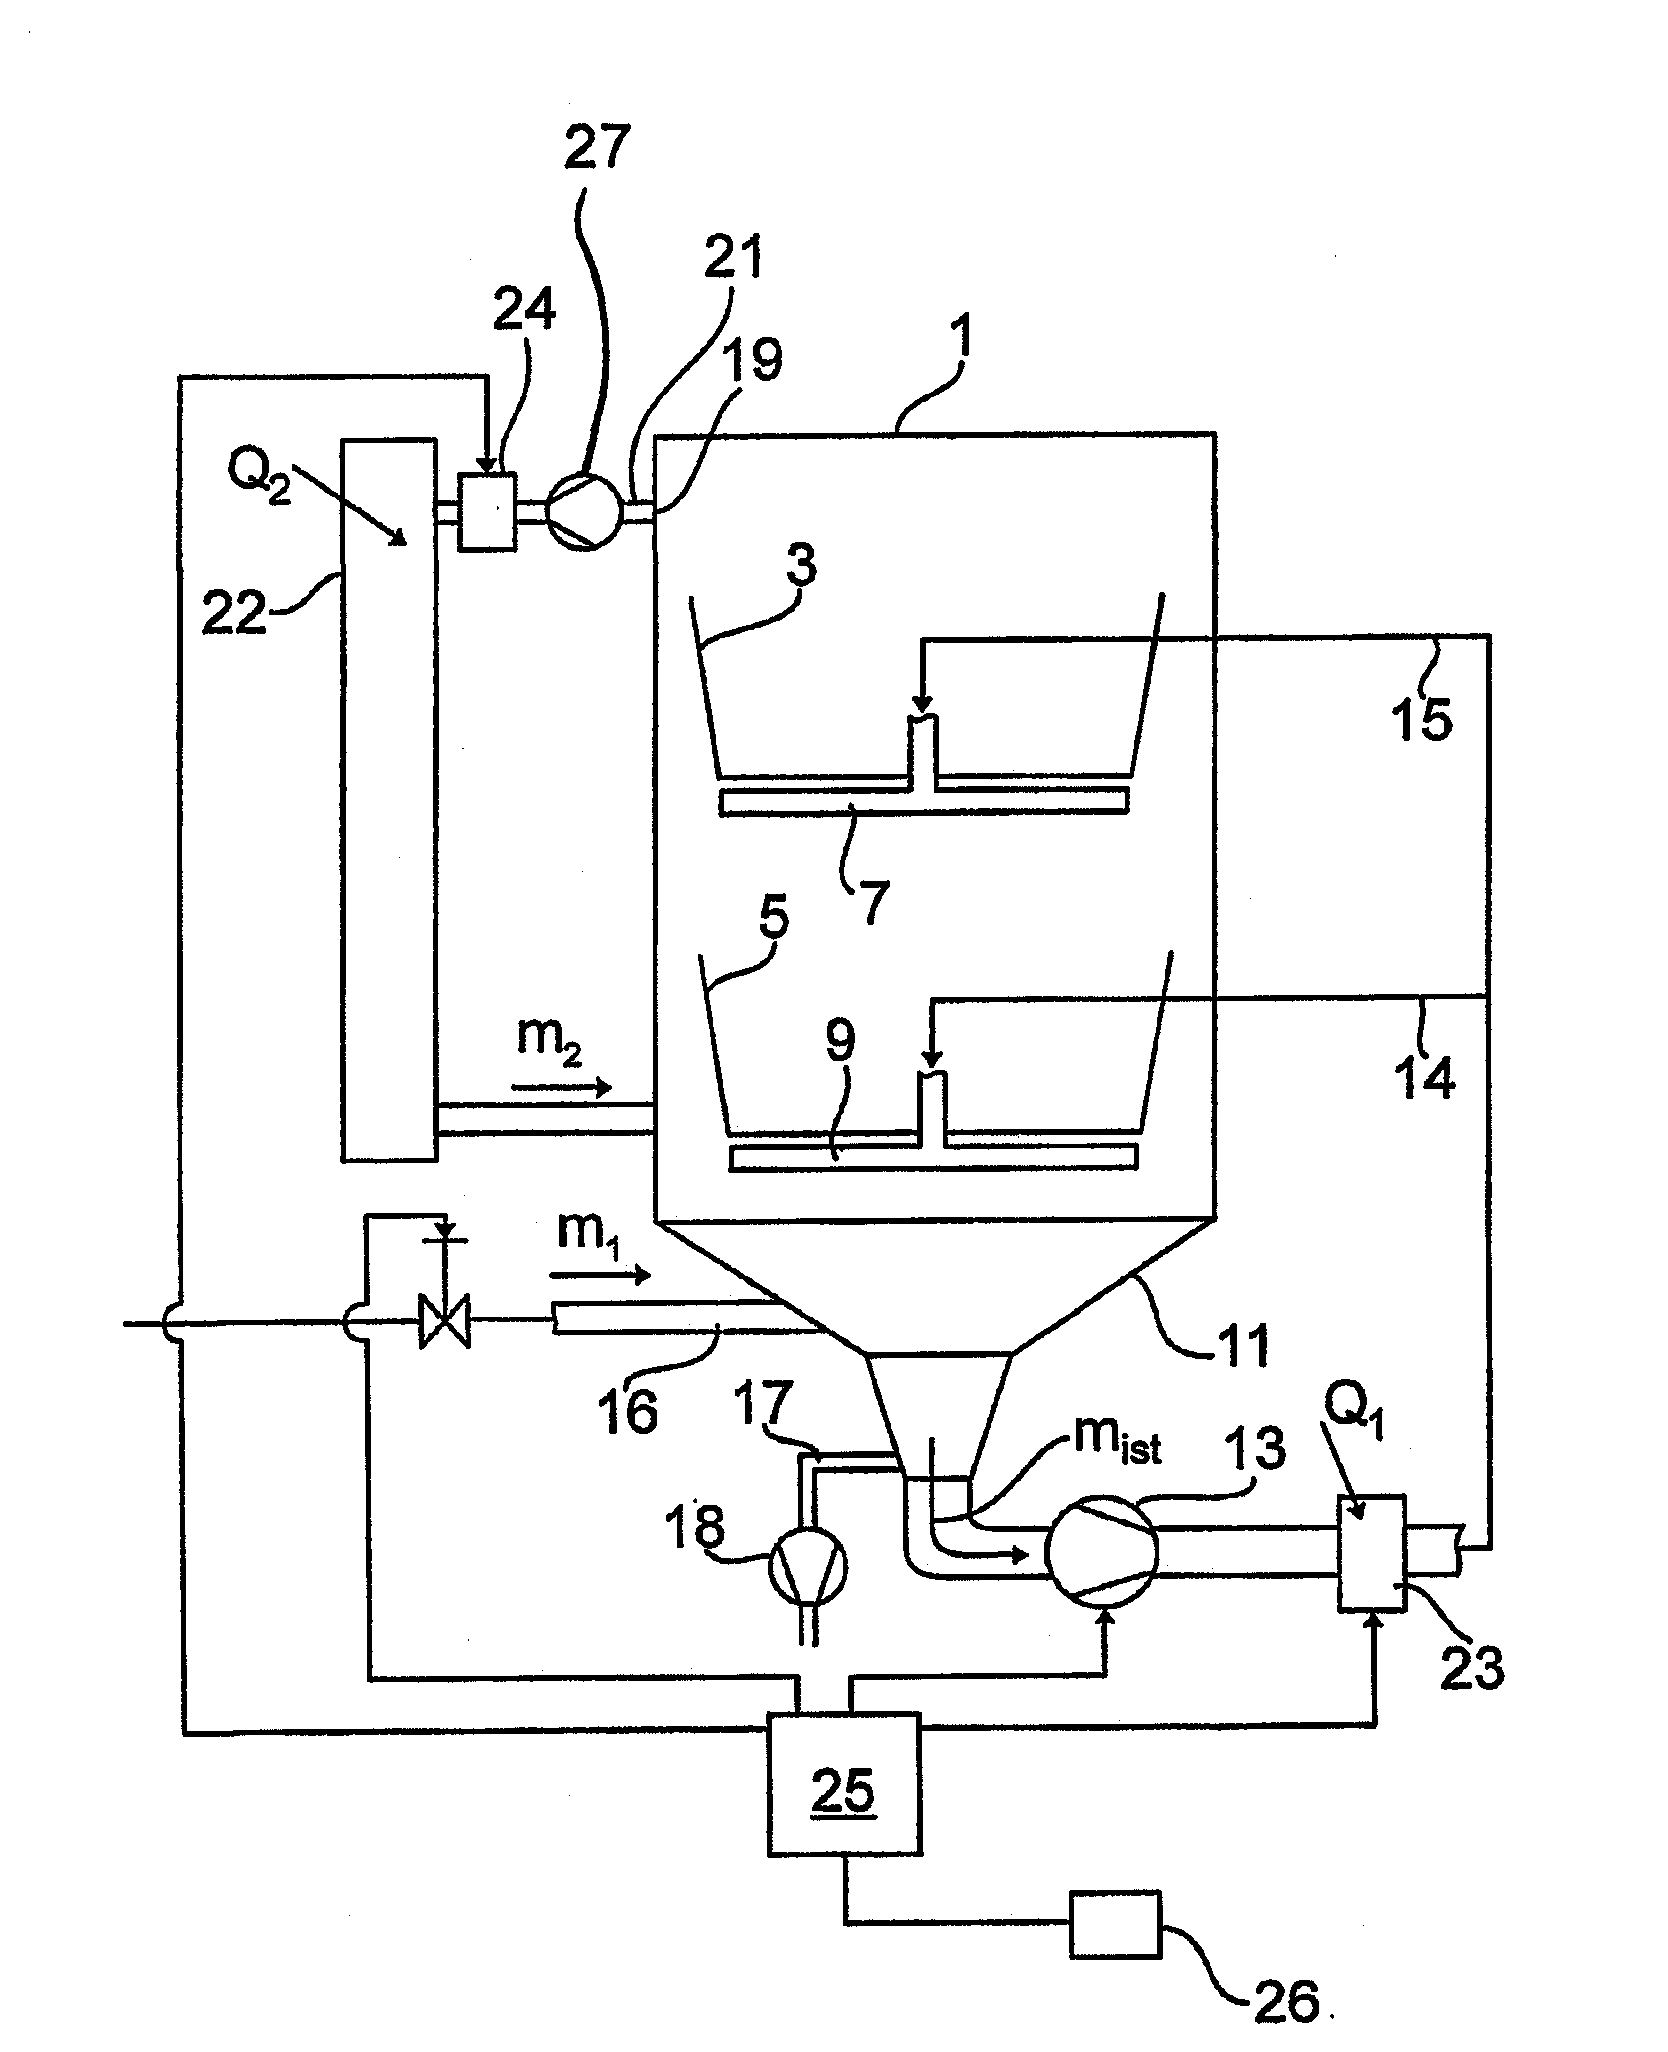 Method for operating a water-carrying household appliance